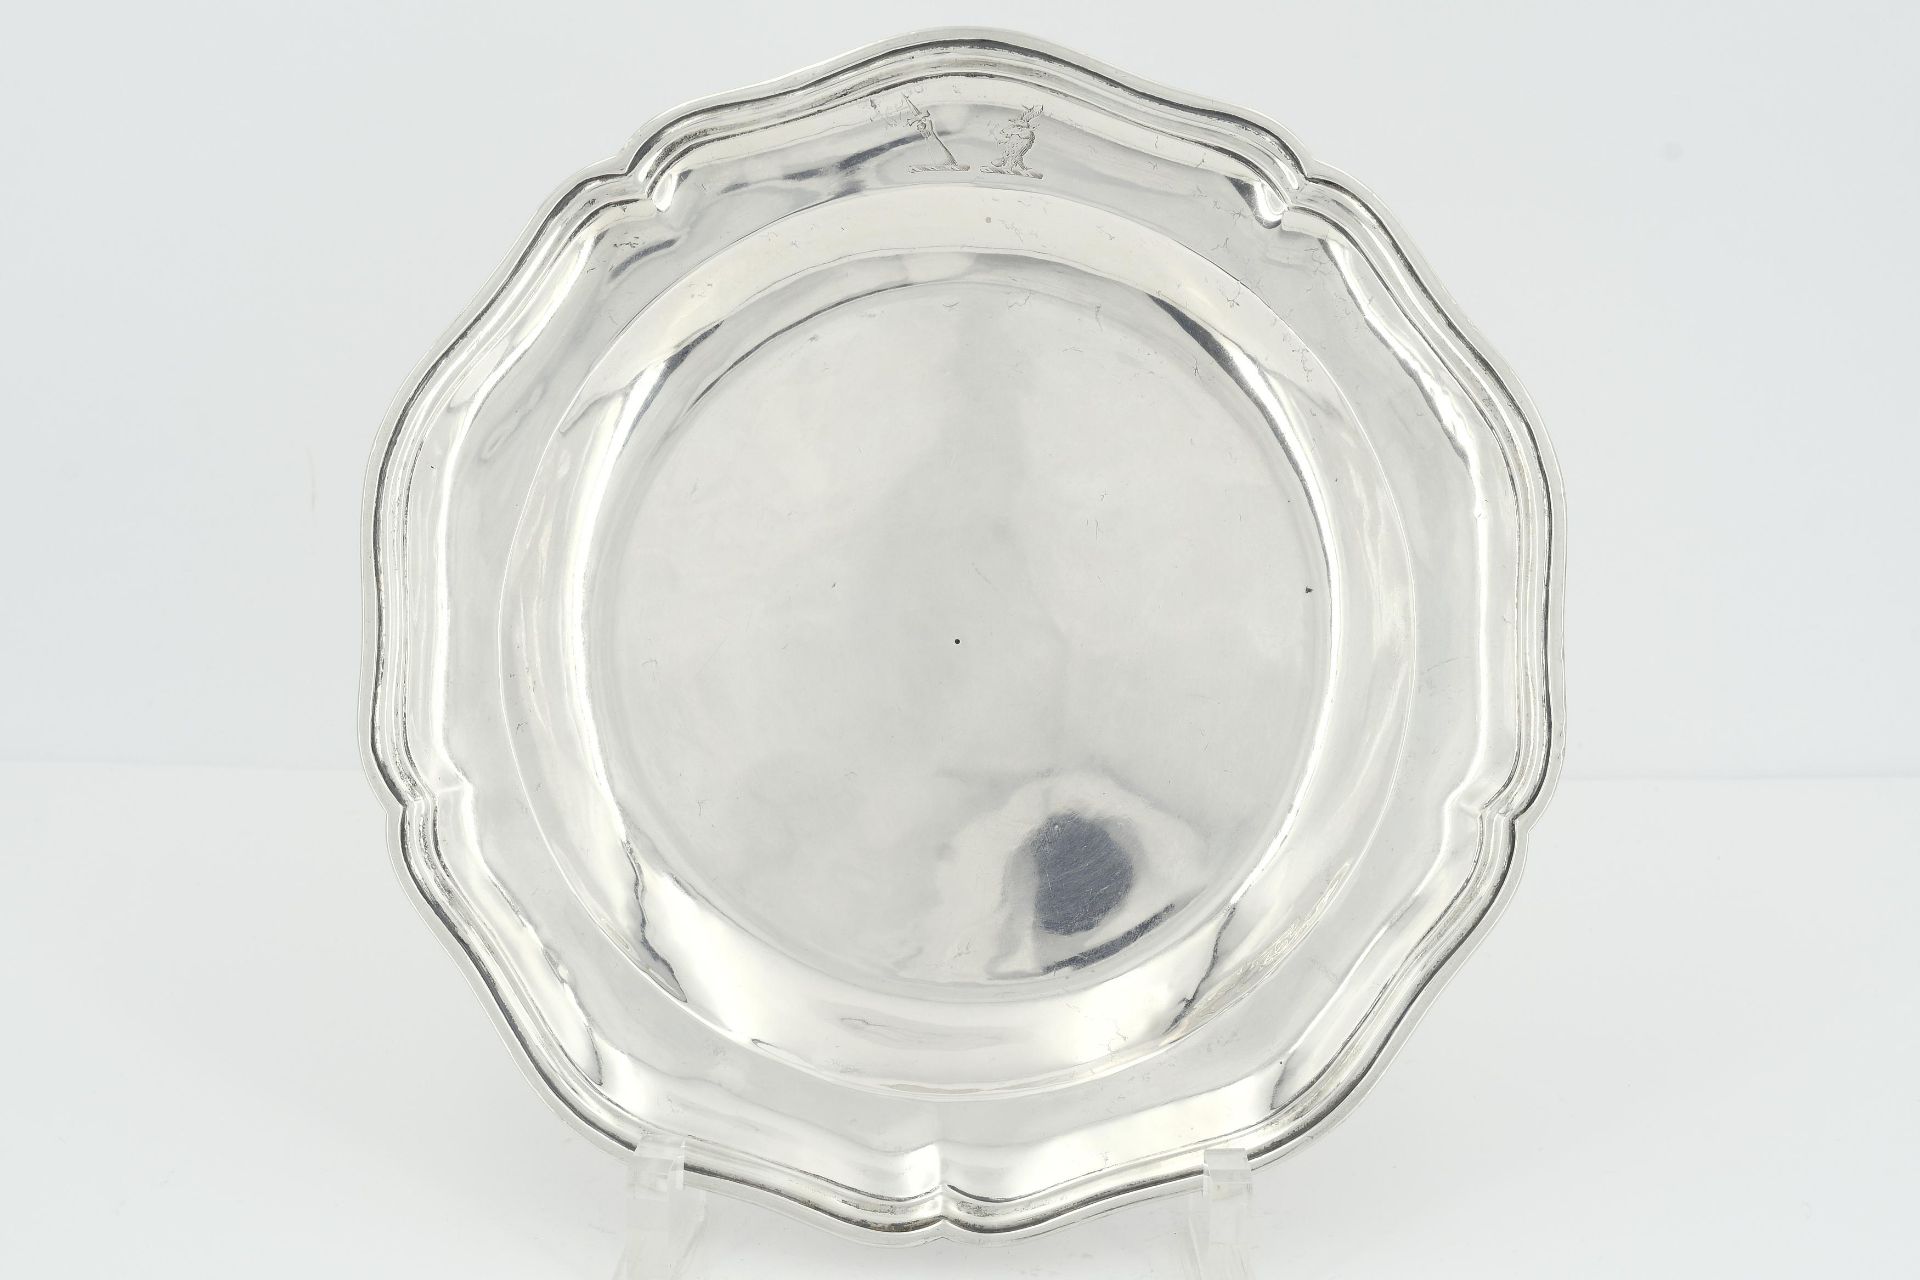 Silver plate with the Lippe rose - Image 2 of 3